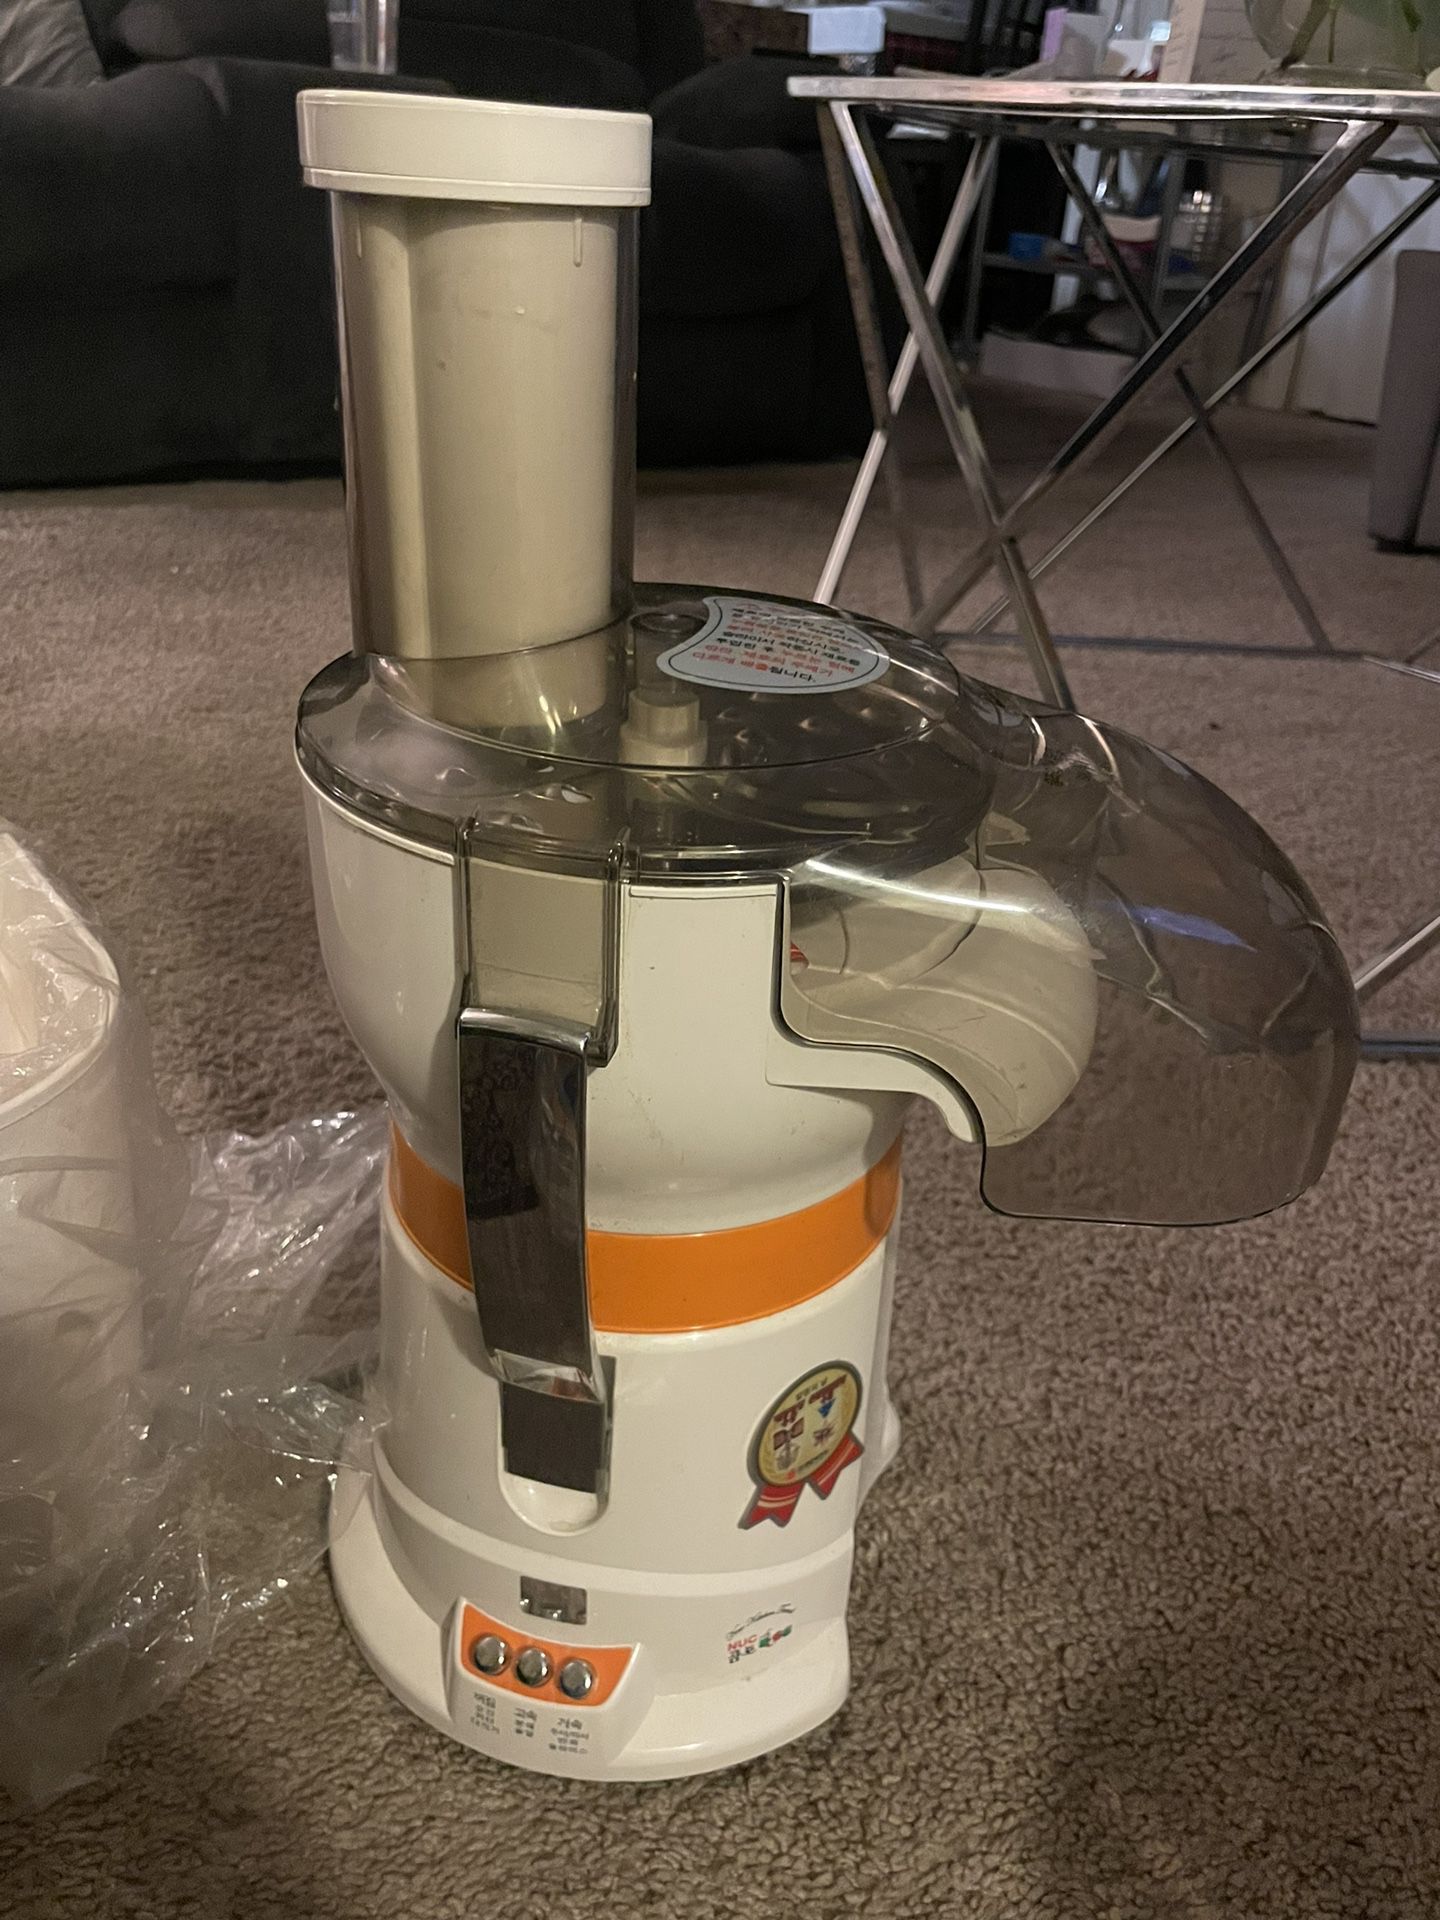 Centrifugal Juicer And Fruit/Vegtable Cutter